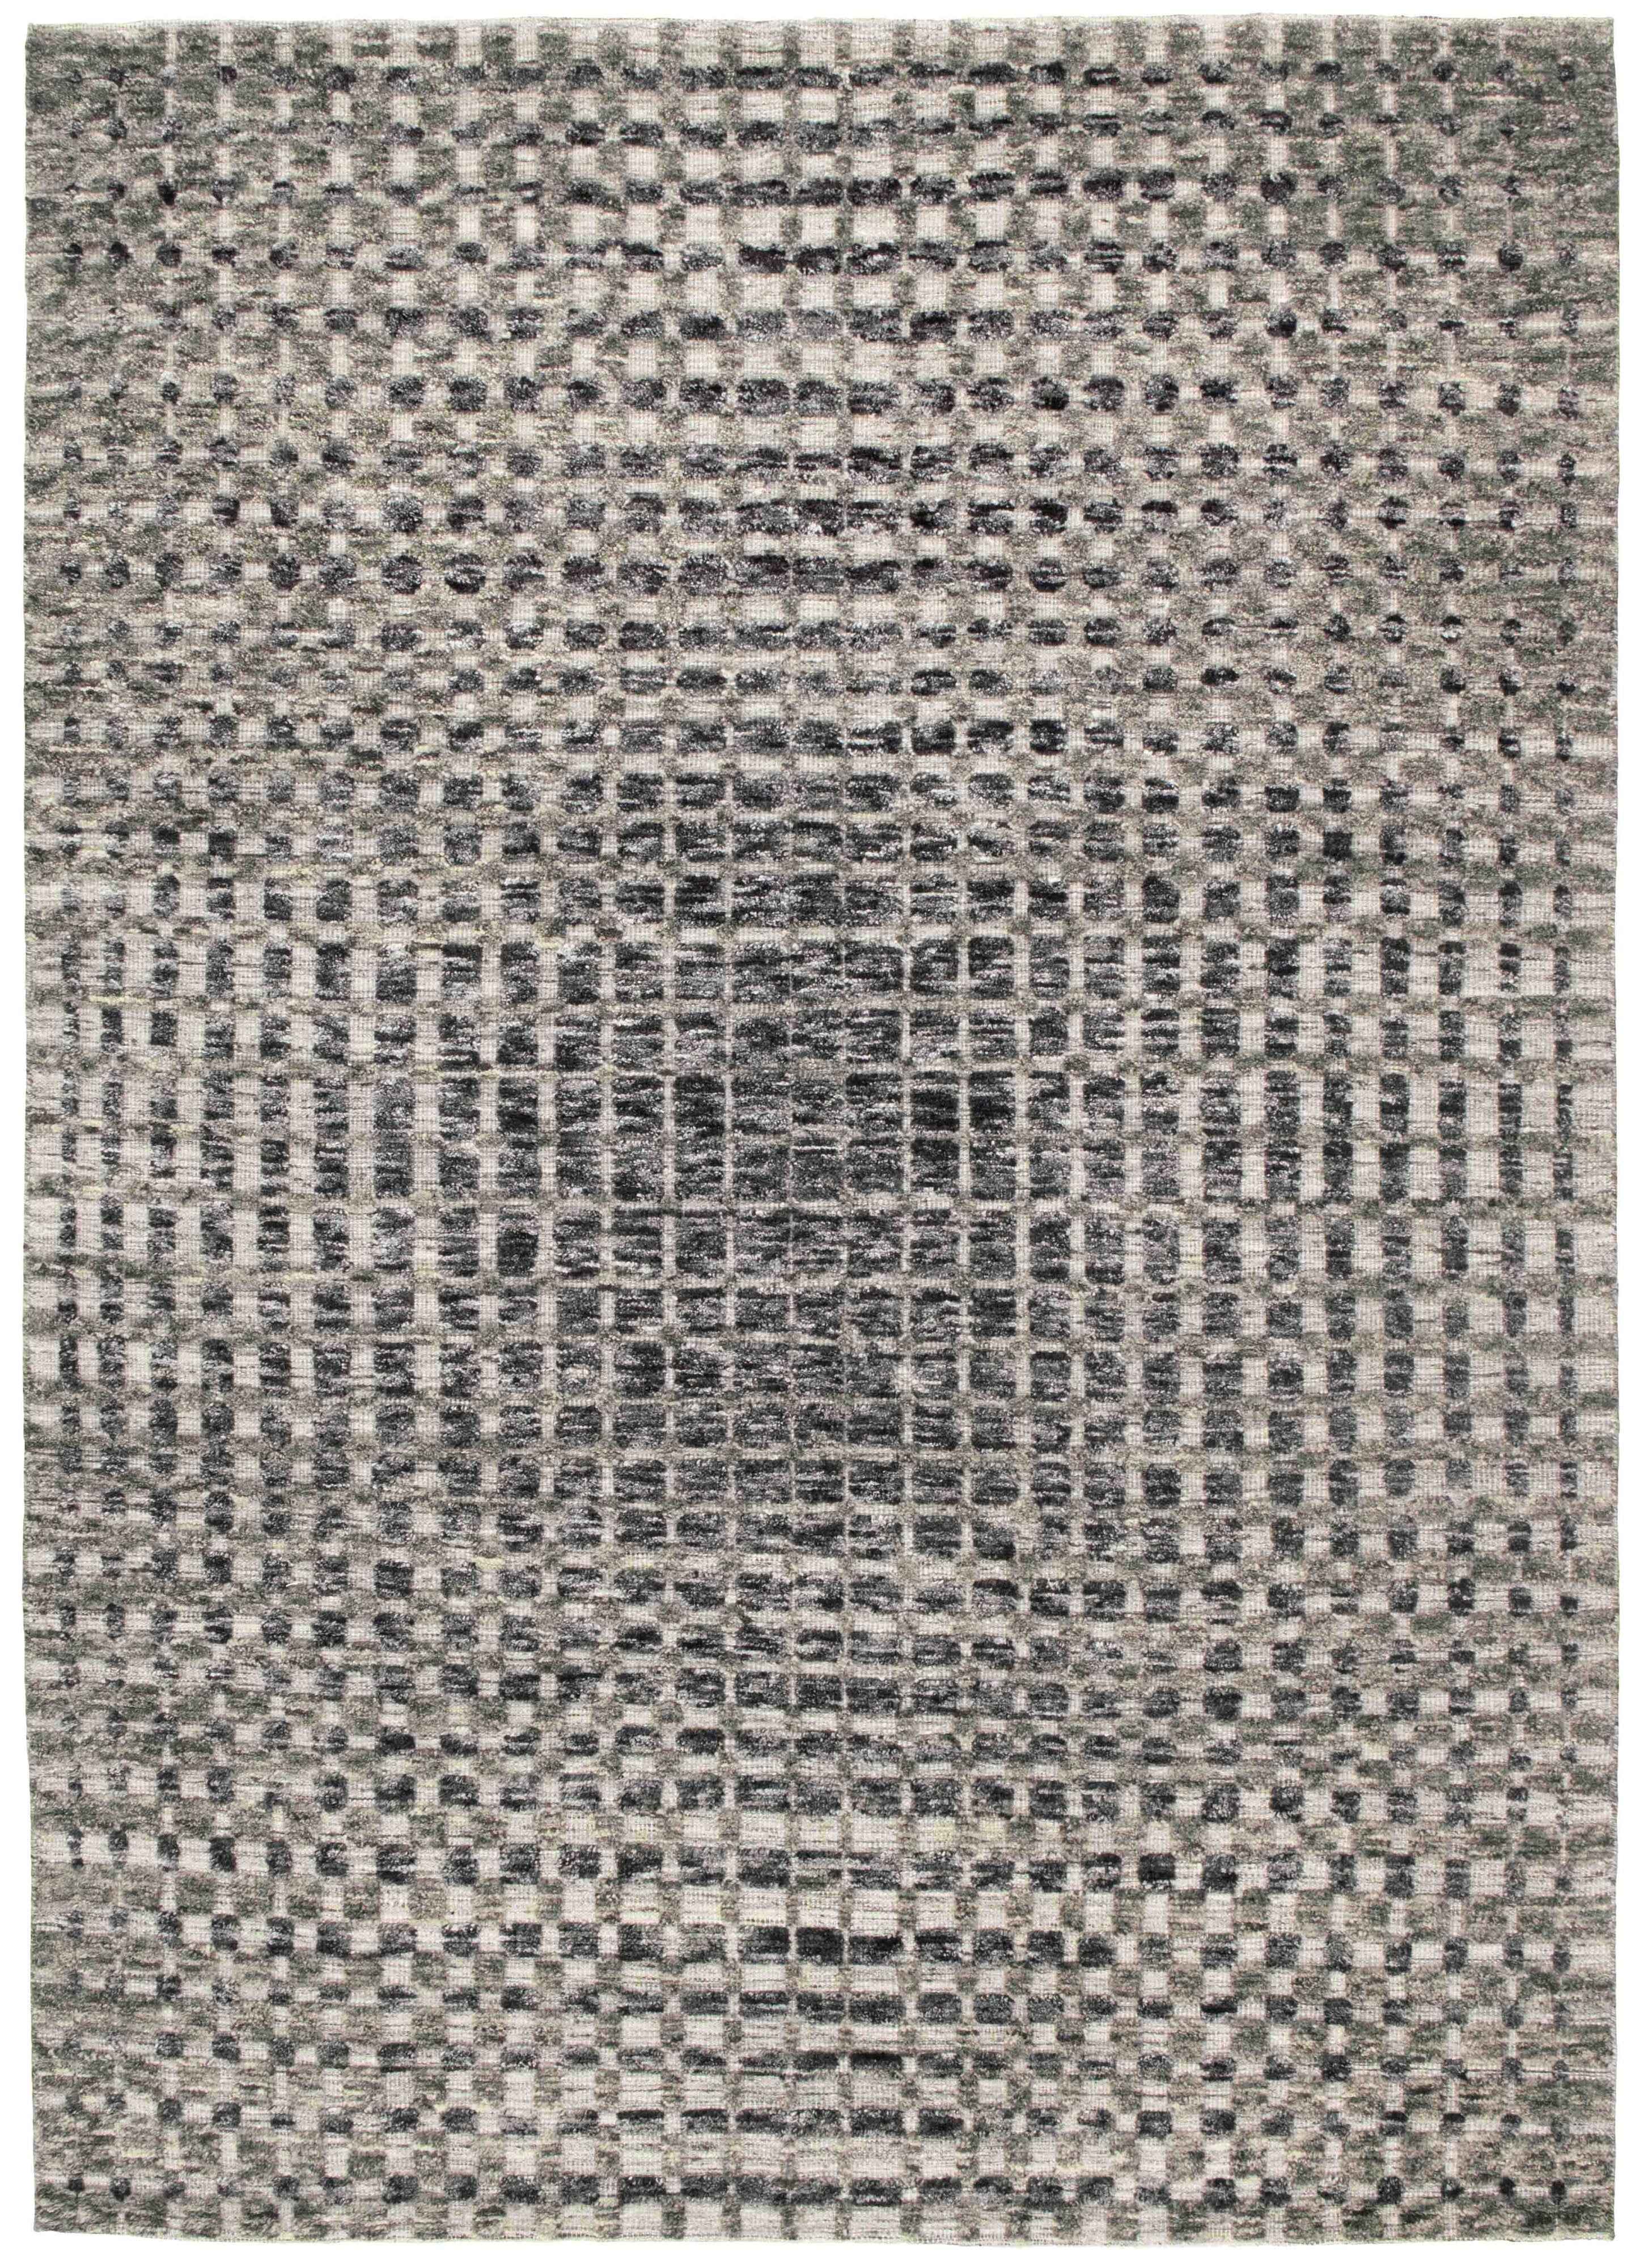 200 x 200 cm Indian Wool Black Rug-Cliff, Charcoal - Rugmaster